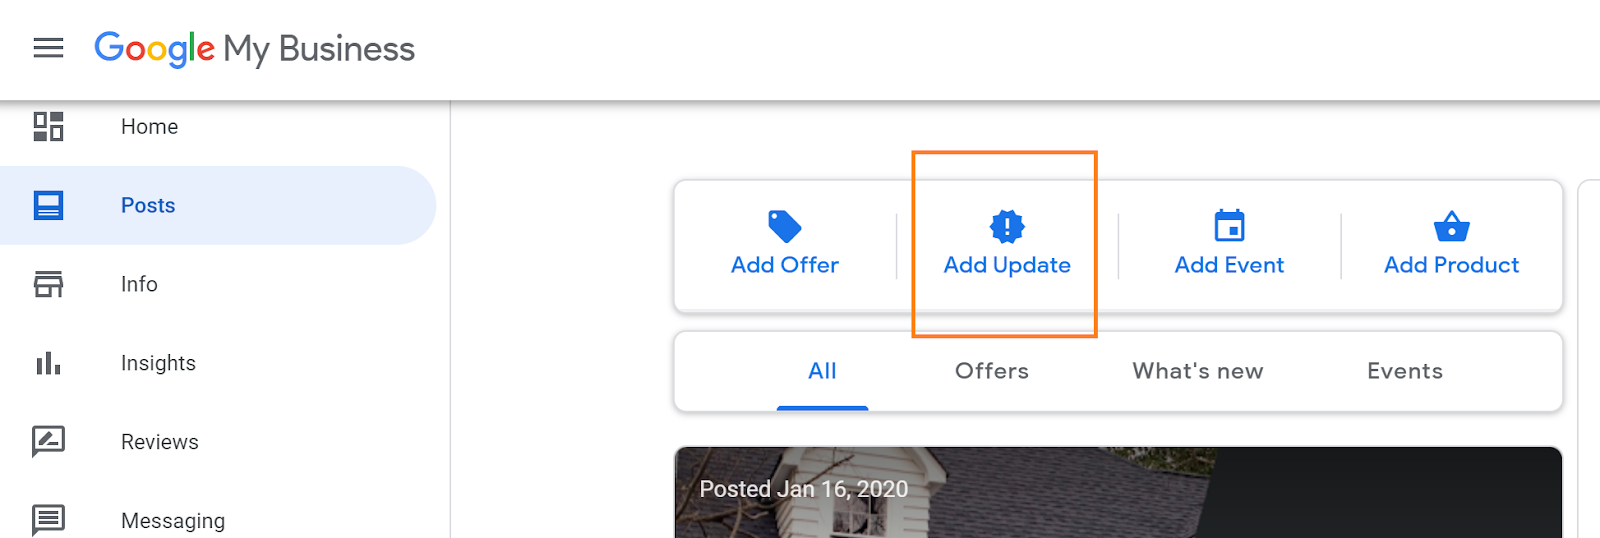 adding an update post to Google My Business listing